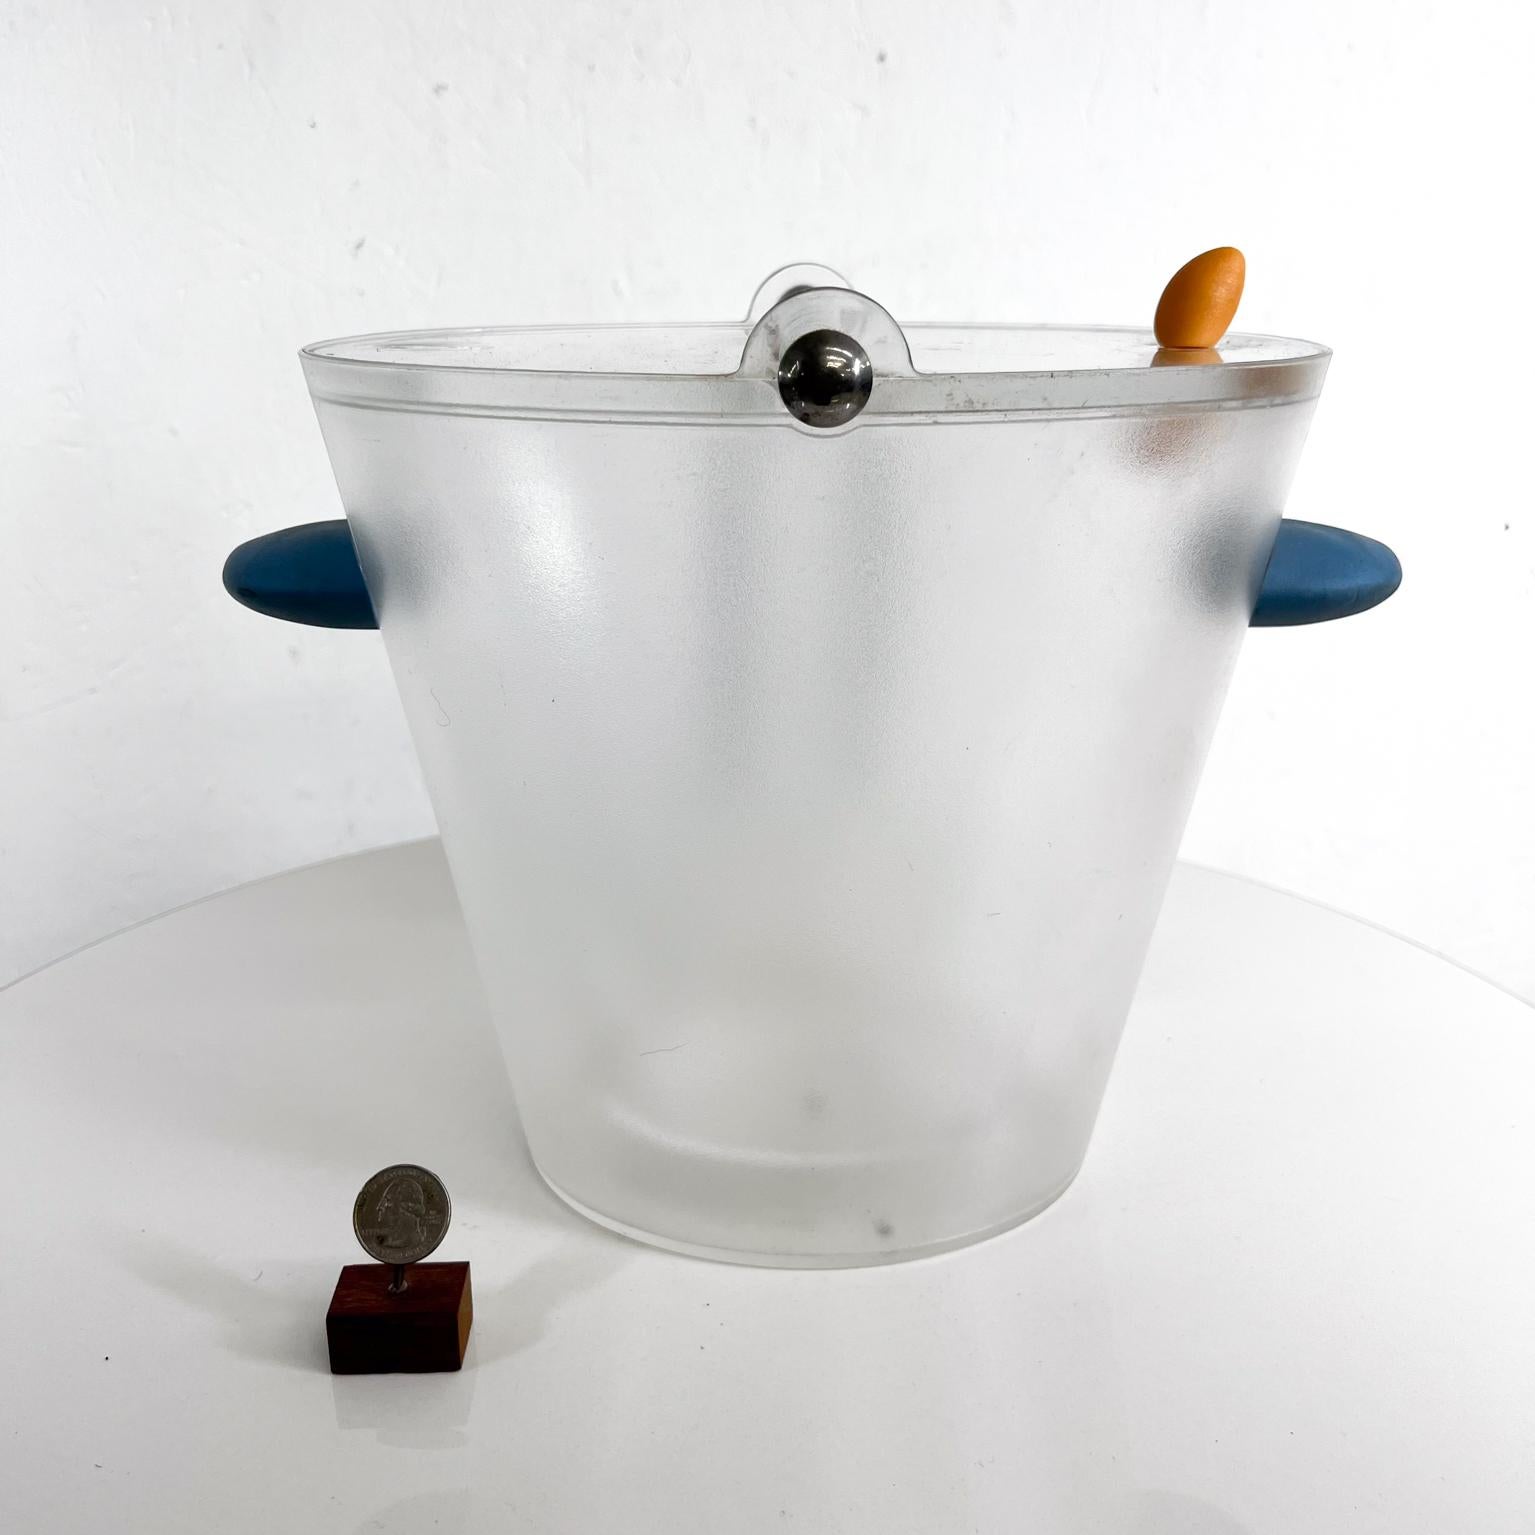 1990s Michael Graves Ice Bucket with Tongs
Frosted plastic and metal
11.38 w x 9 d x 10.5 h
Preowned original vintage condition.
Refer to provided images.